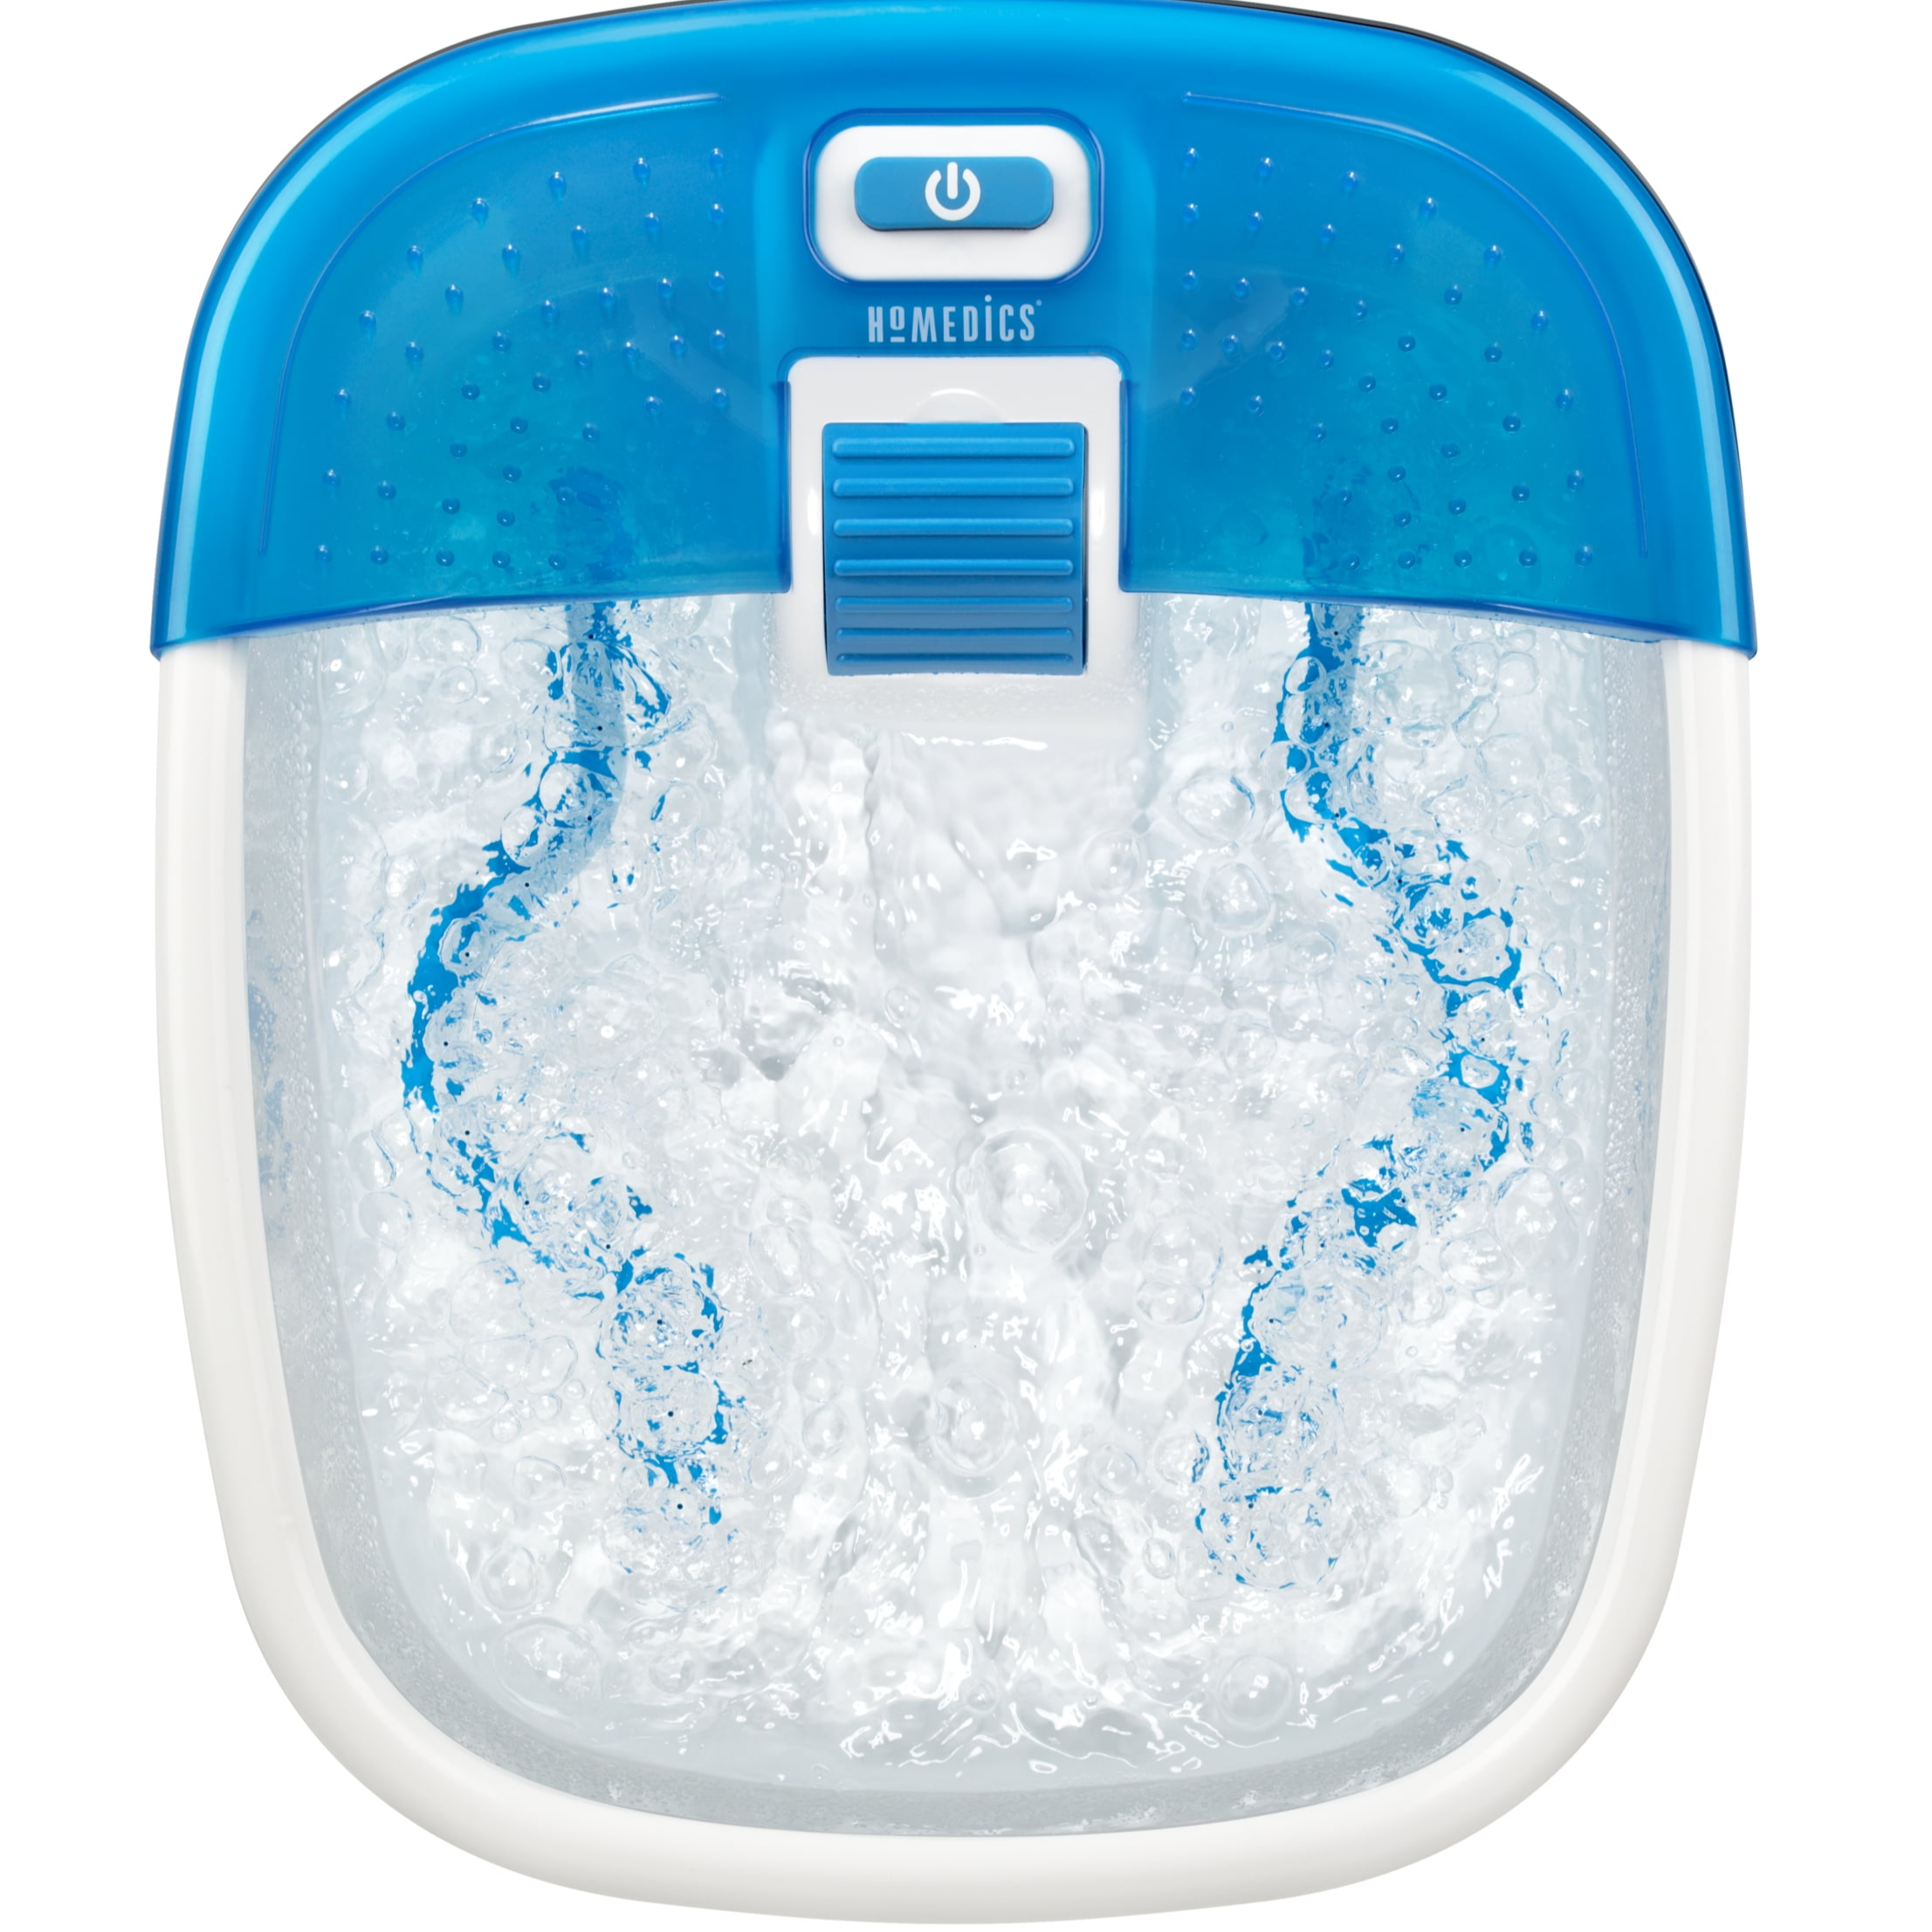 Homedics Bubble Bliss® Deluxe Foot Spa Surrounds Your Feet with Massaging Bubbles - Blue - image 1 of 12